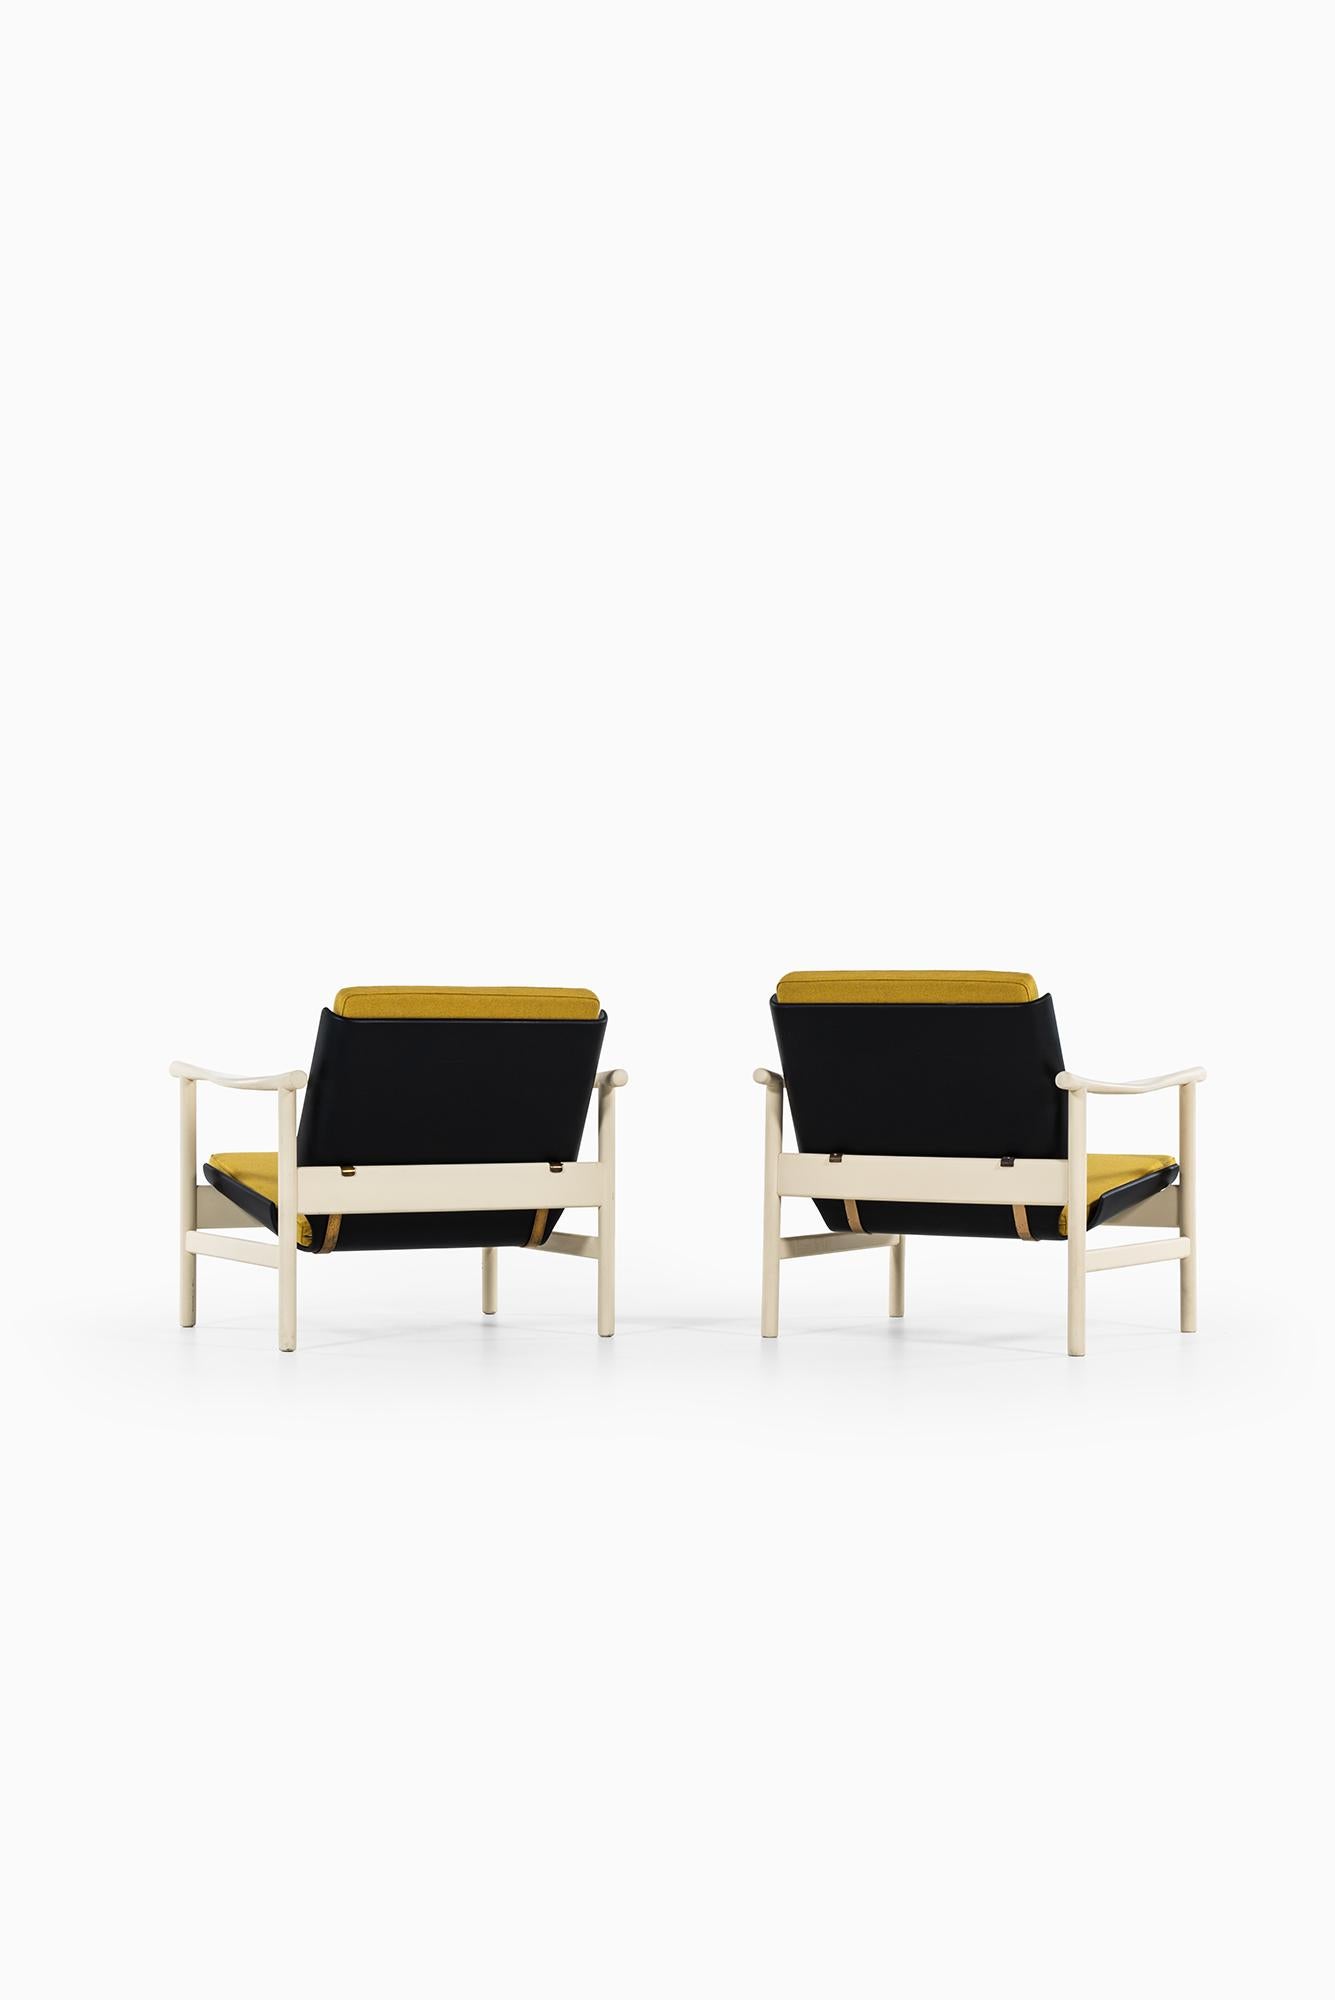 Pair of easy chairs in white and black lacquered wood produced in Denmark In Good Condition For Sale In Limhamn, Skåne län